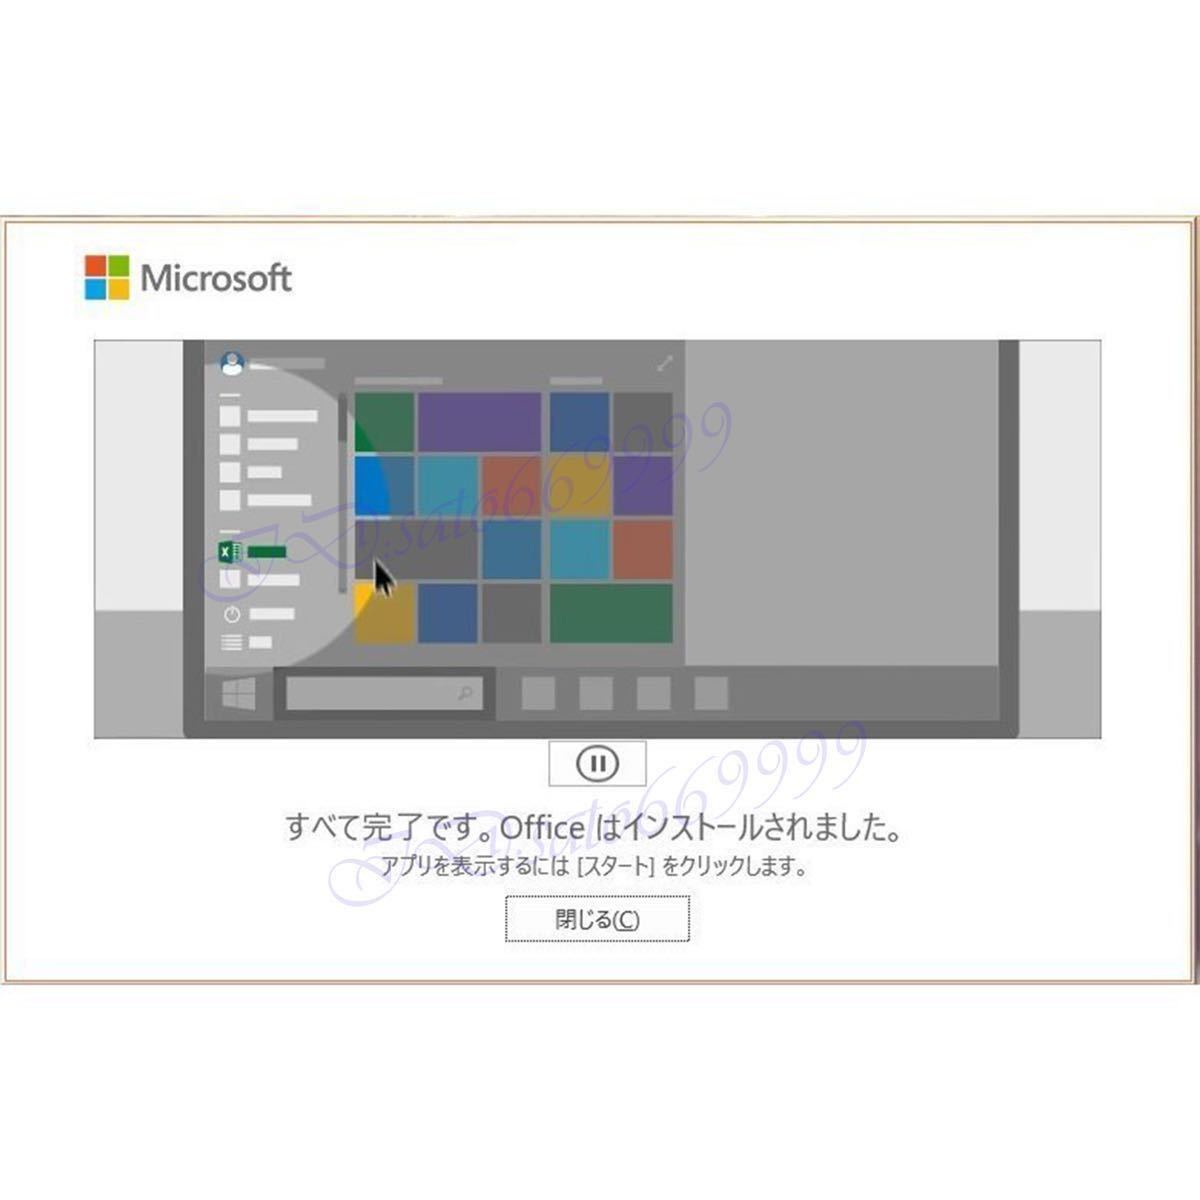 Microsoft Office2021 Professional Plusプロダクトキー日本語 正規認証保証Word Excel PowerPoint Access 安心サポート付き　水_画像4